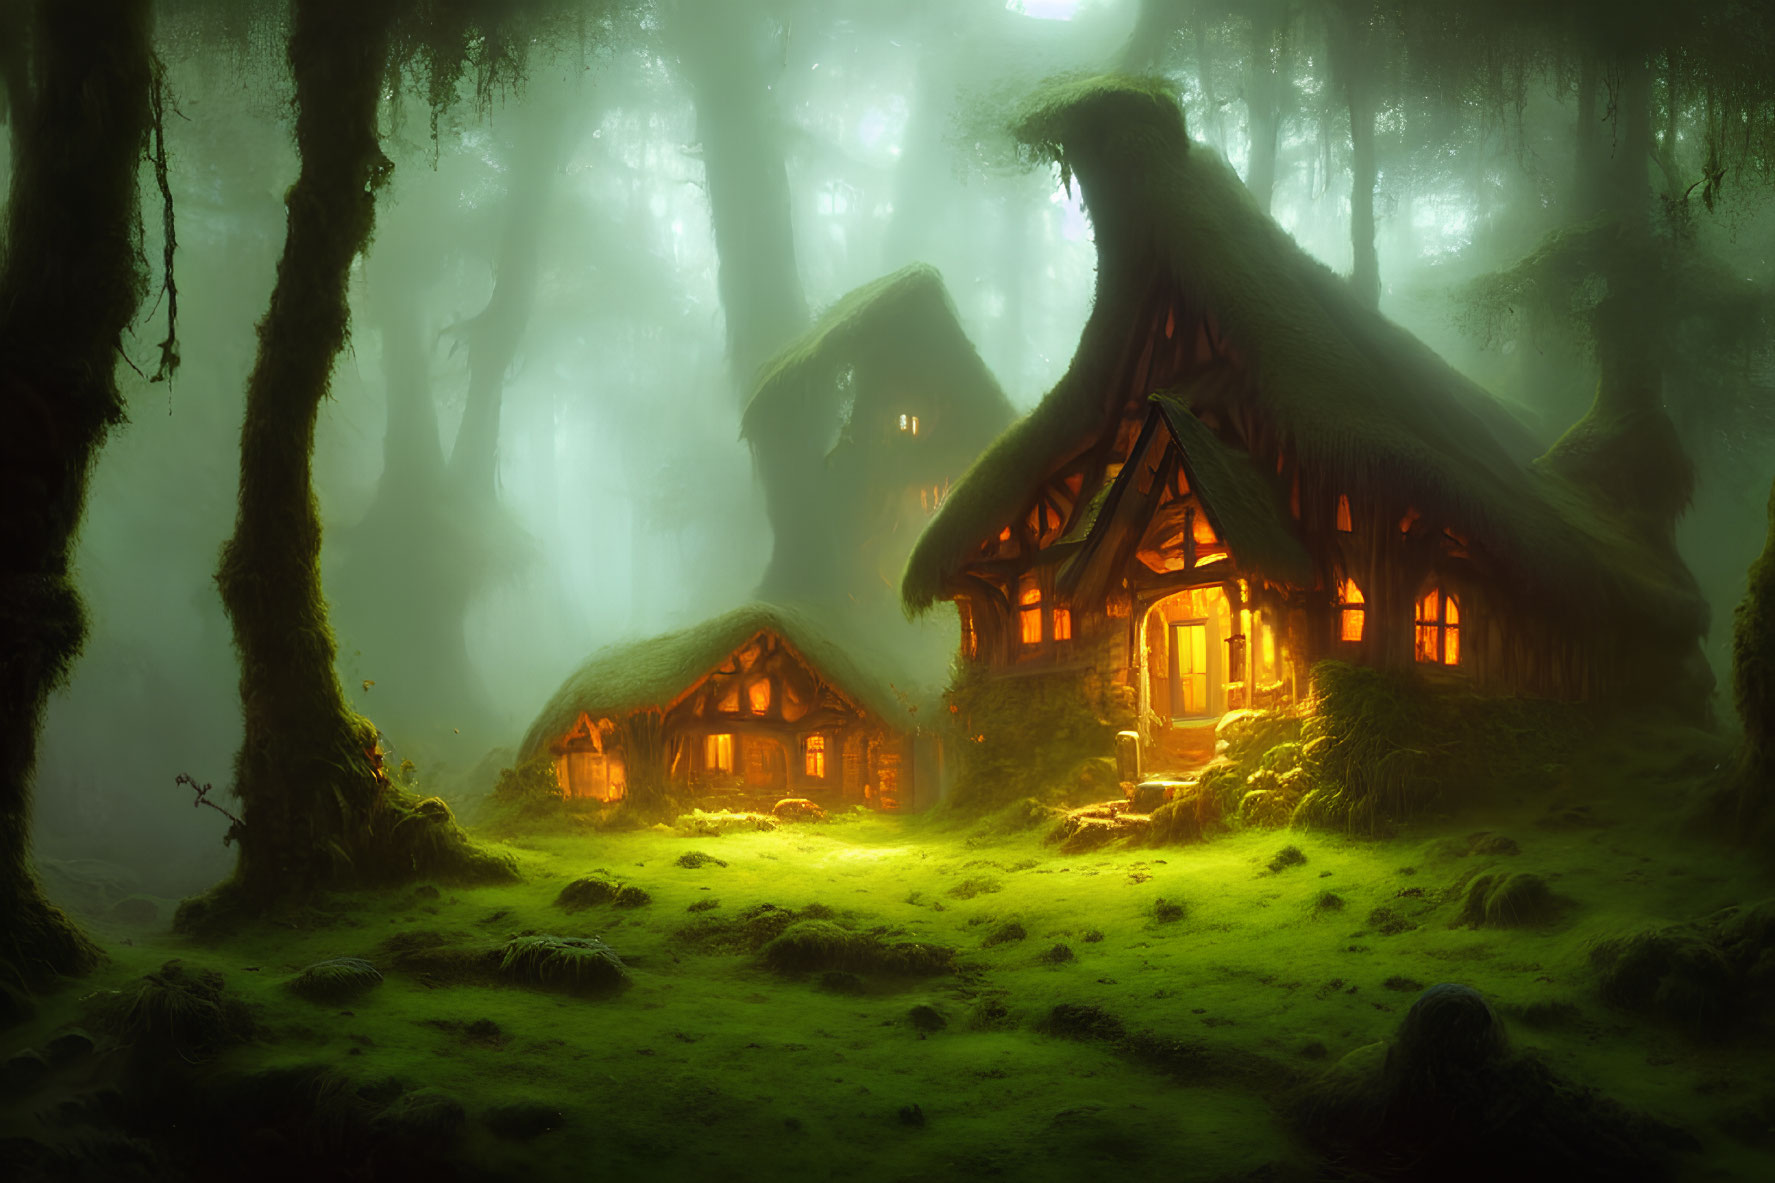 Moss-Covered Enchanted Forest with Fairy Tale Cottages